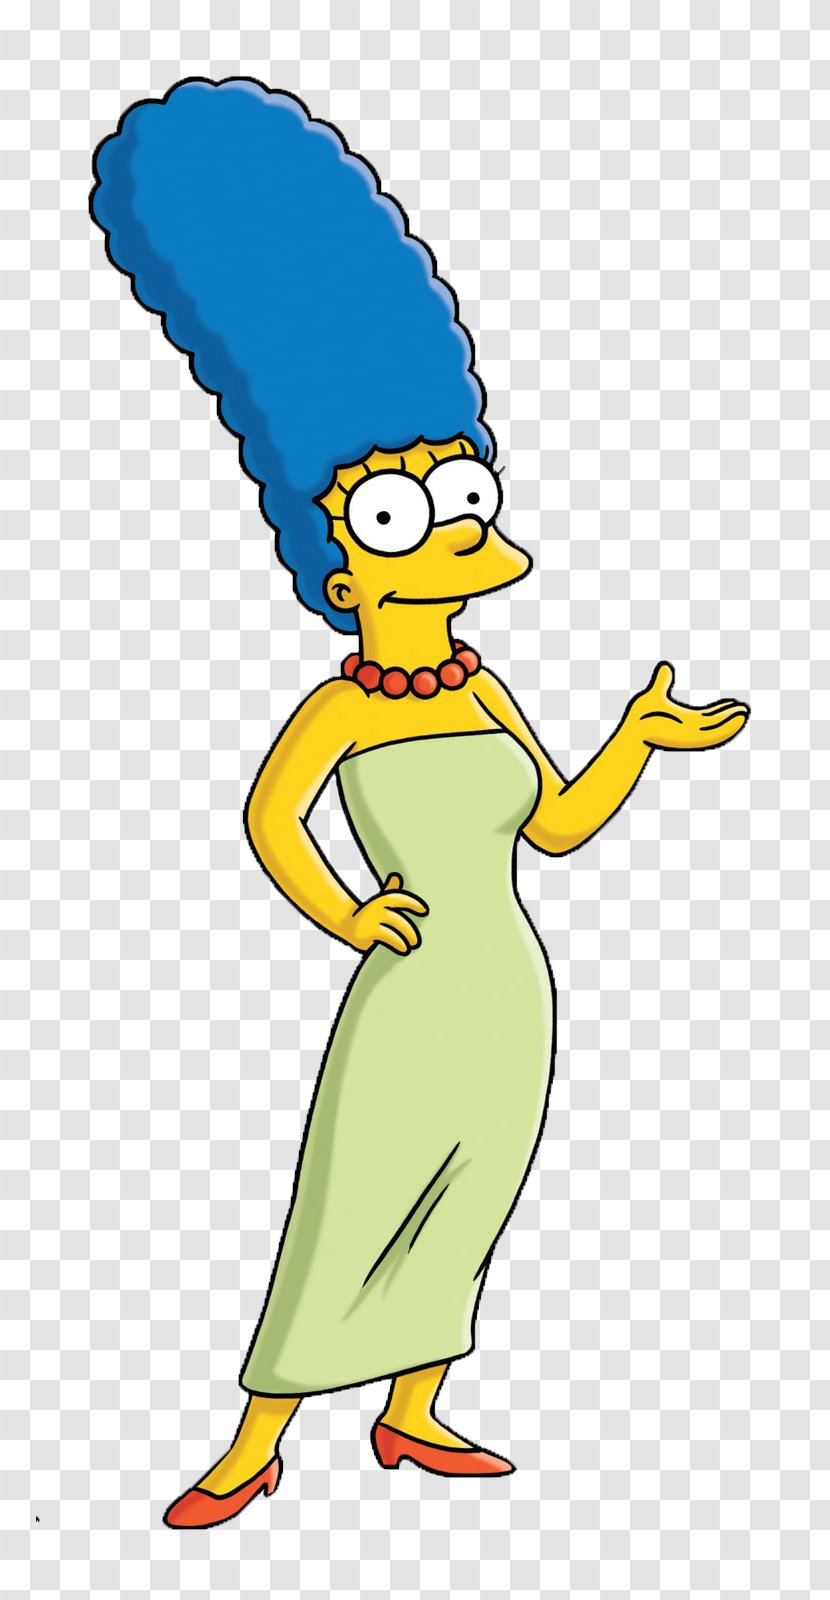 Marge Simpson Homer Lisa Maggie Bart - Animal Figure - The Simpsons Transparent PNG